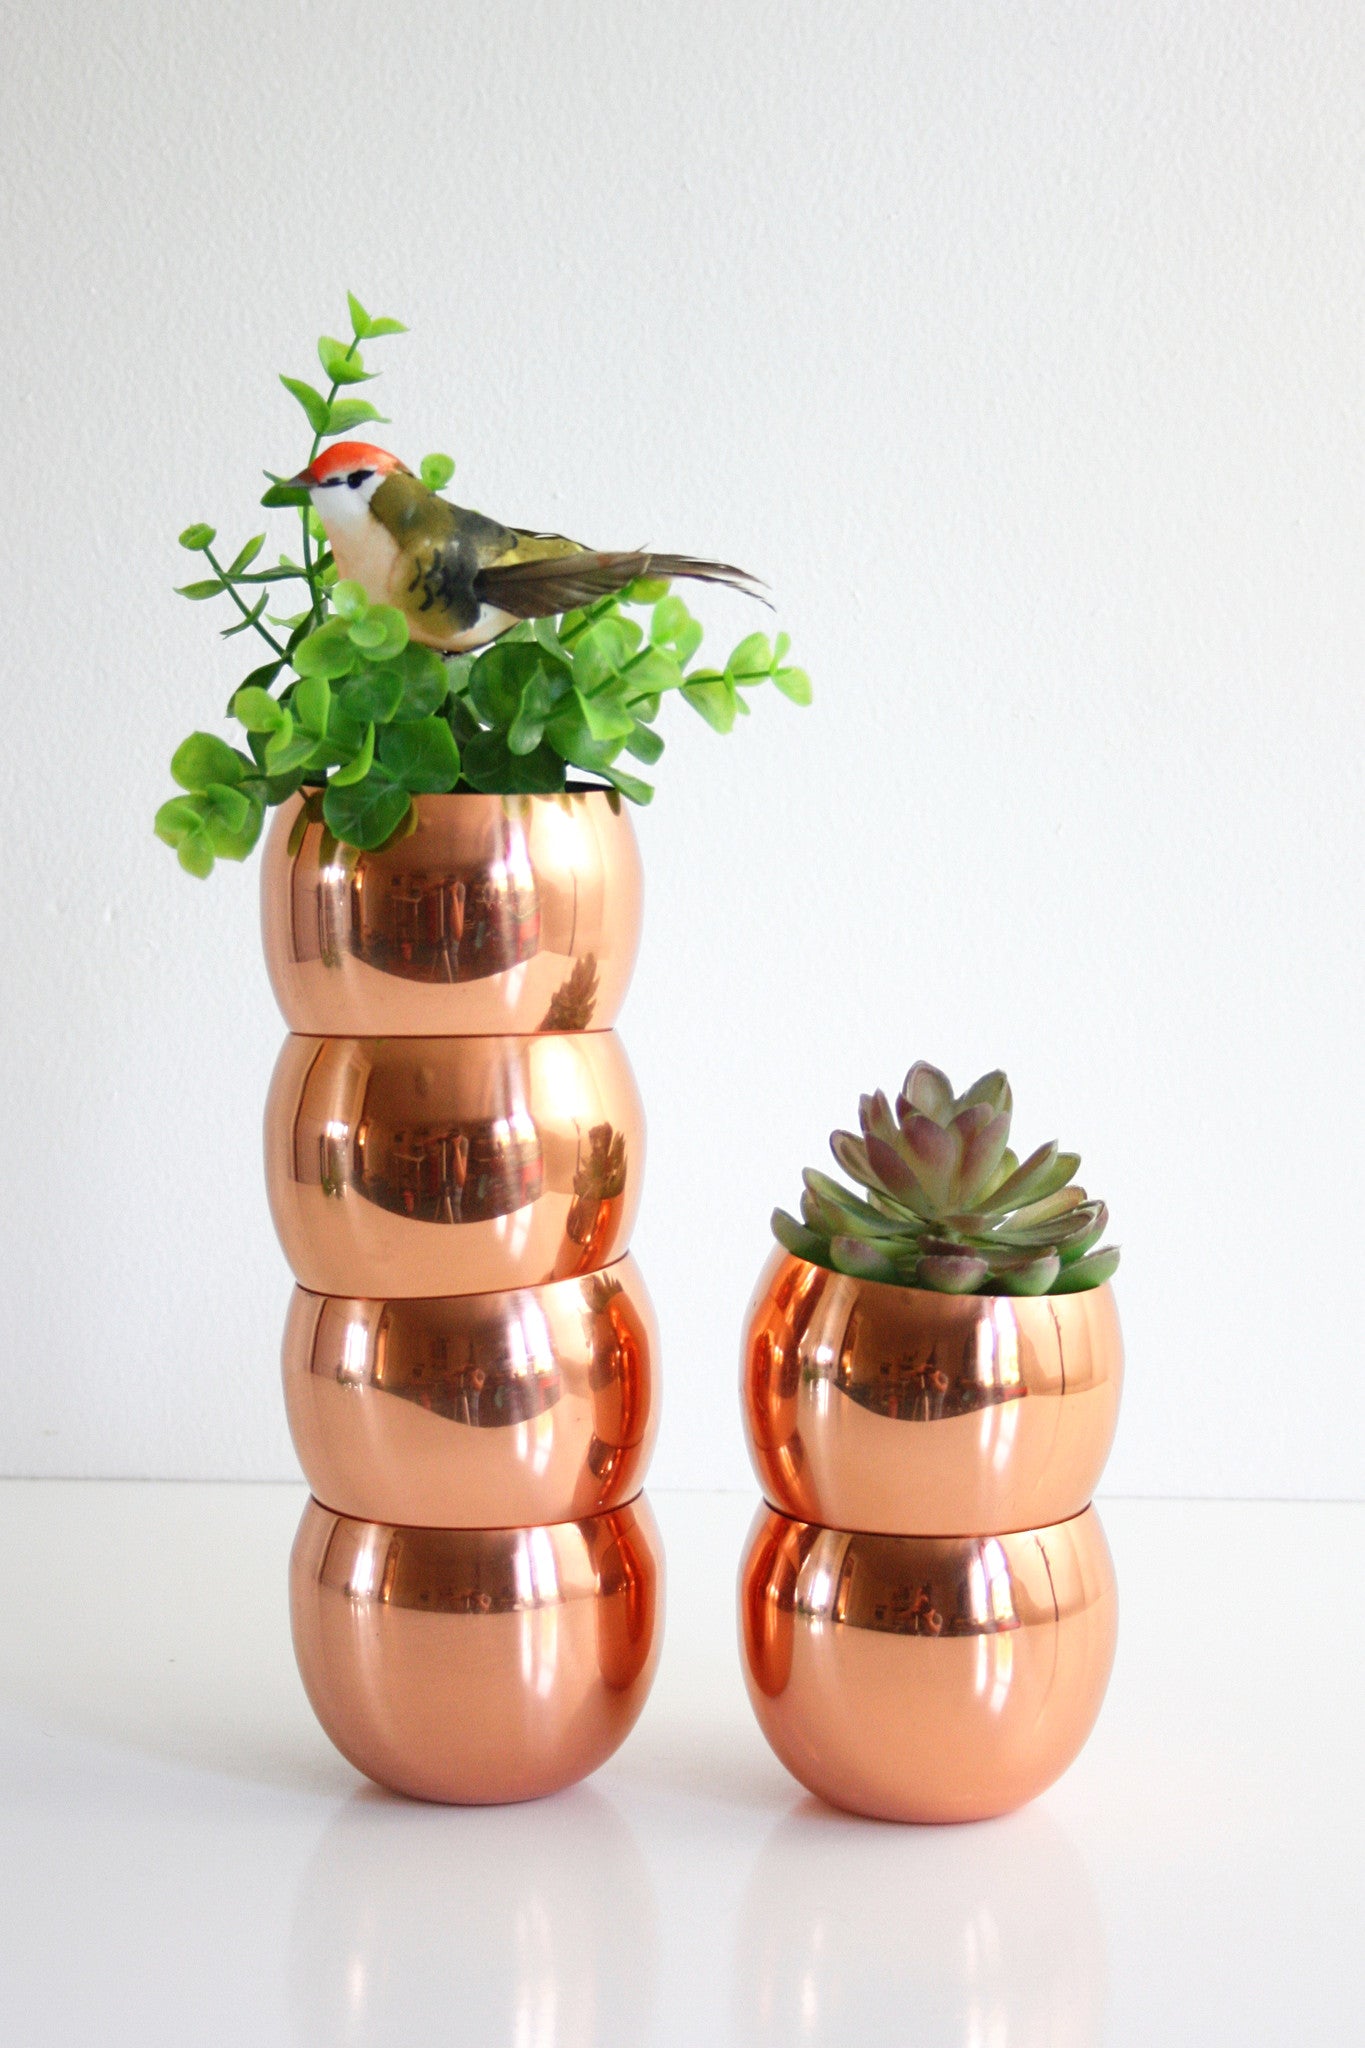 SOLD - Mid Century Modern Copper Roly Poly Tumblers / Vintage Coppercraft Guild Copper Cups